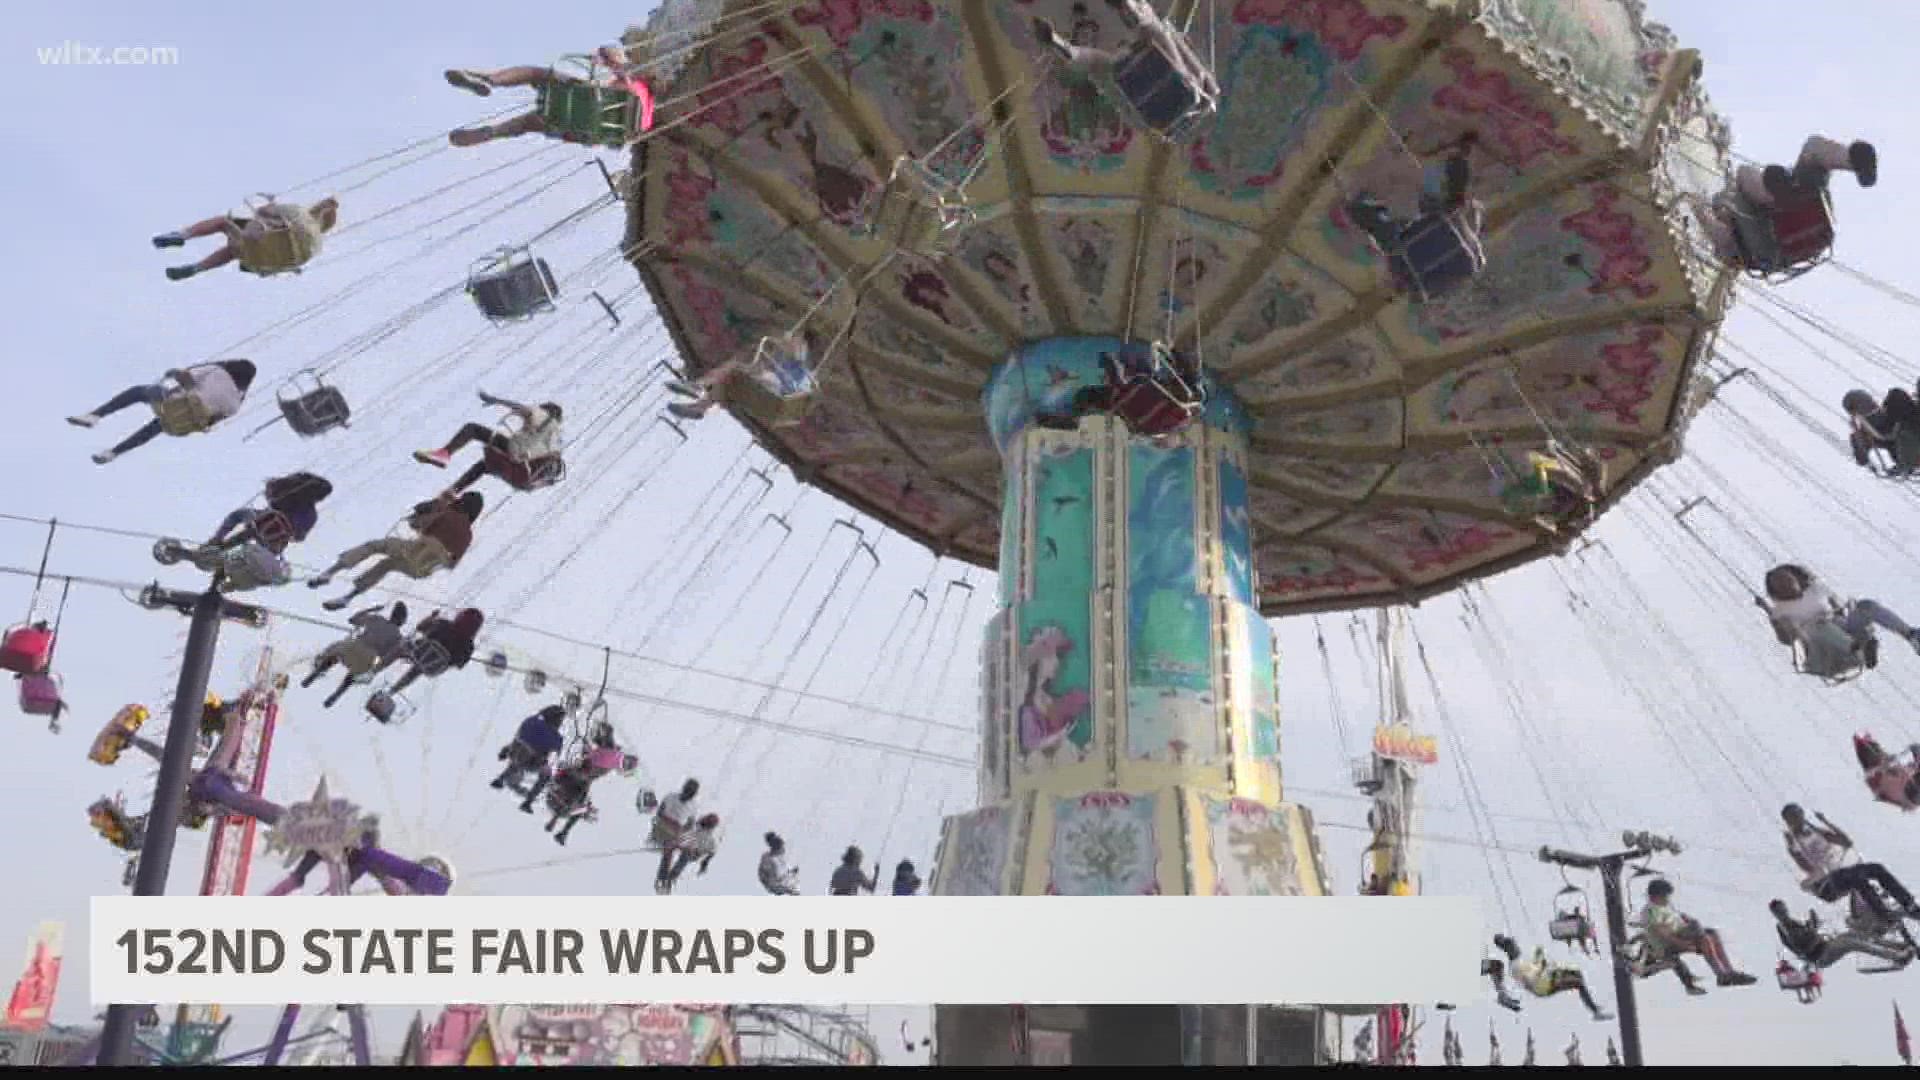 The South Carolina State Fair brought in almost 350,000 people during its 12 day span, according to fair officials.